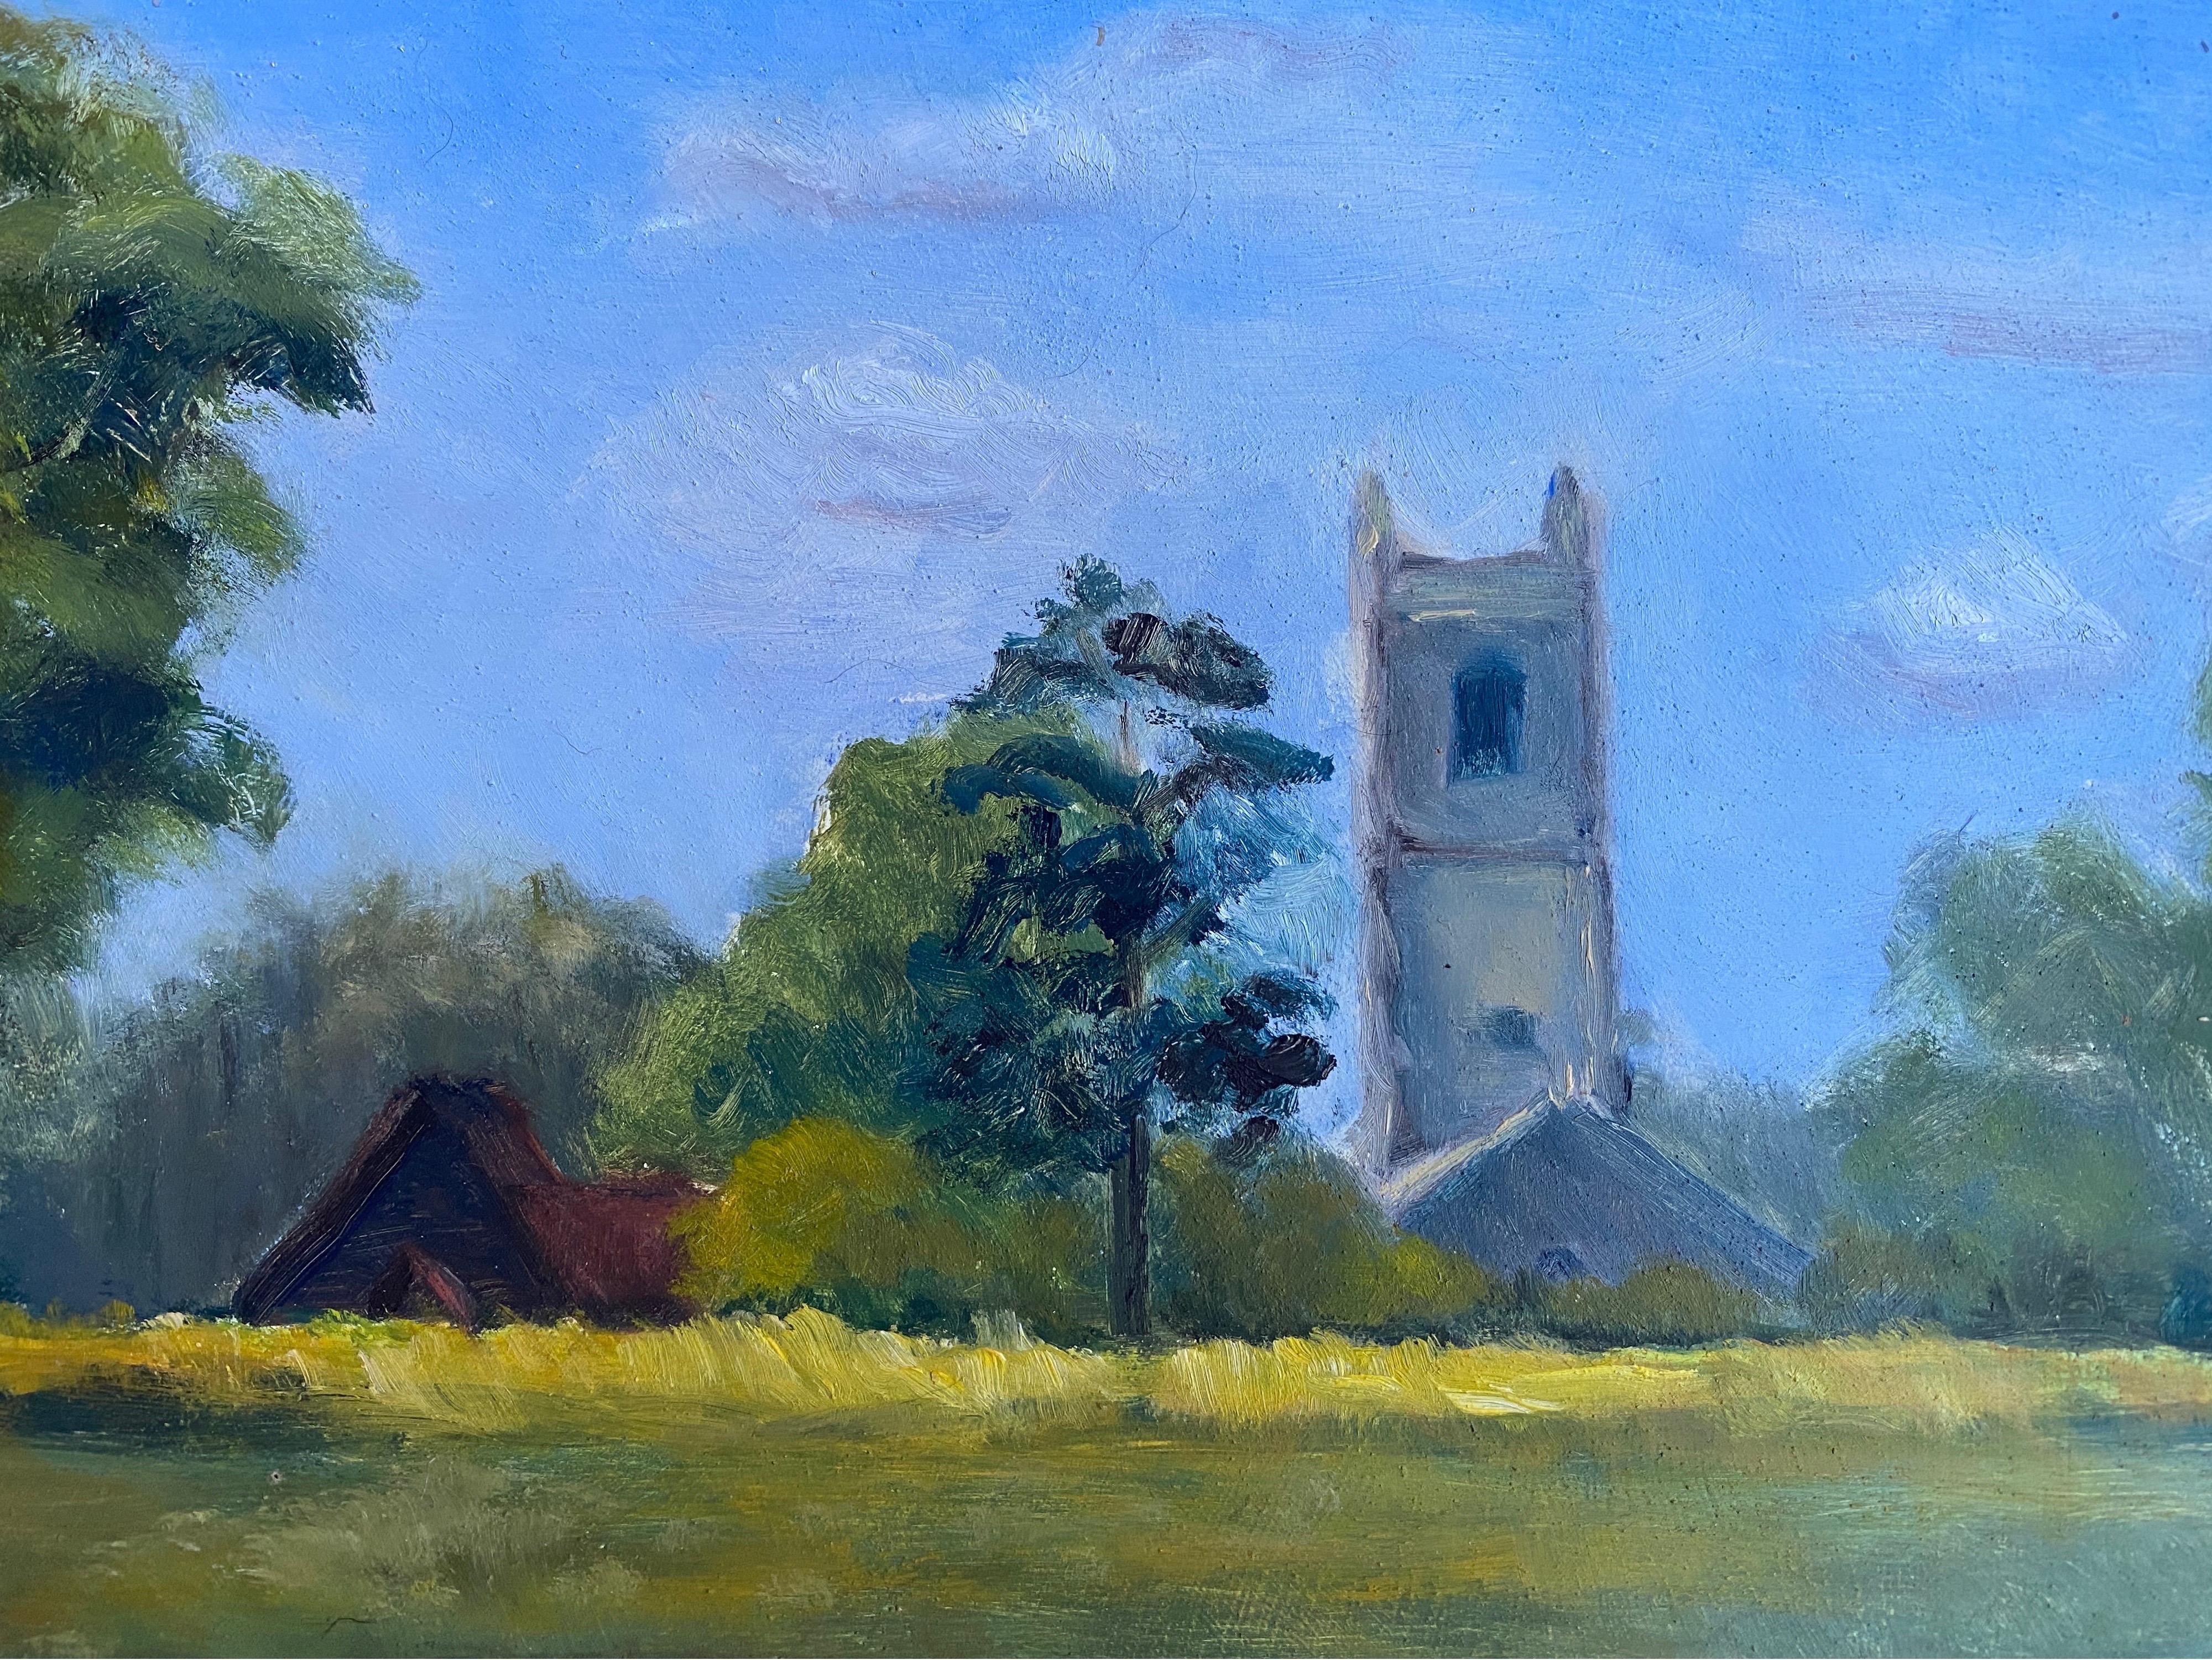 English Parish Church in Summer Landscape Rural Fields, 20th C English Oil  - Painting by English Impressionist